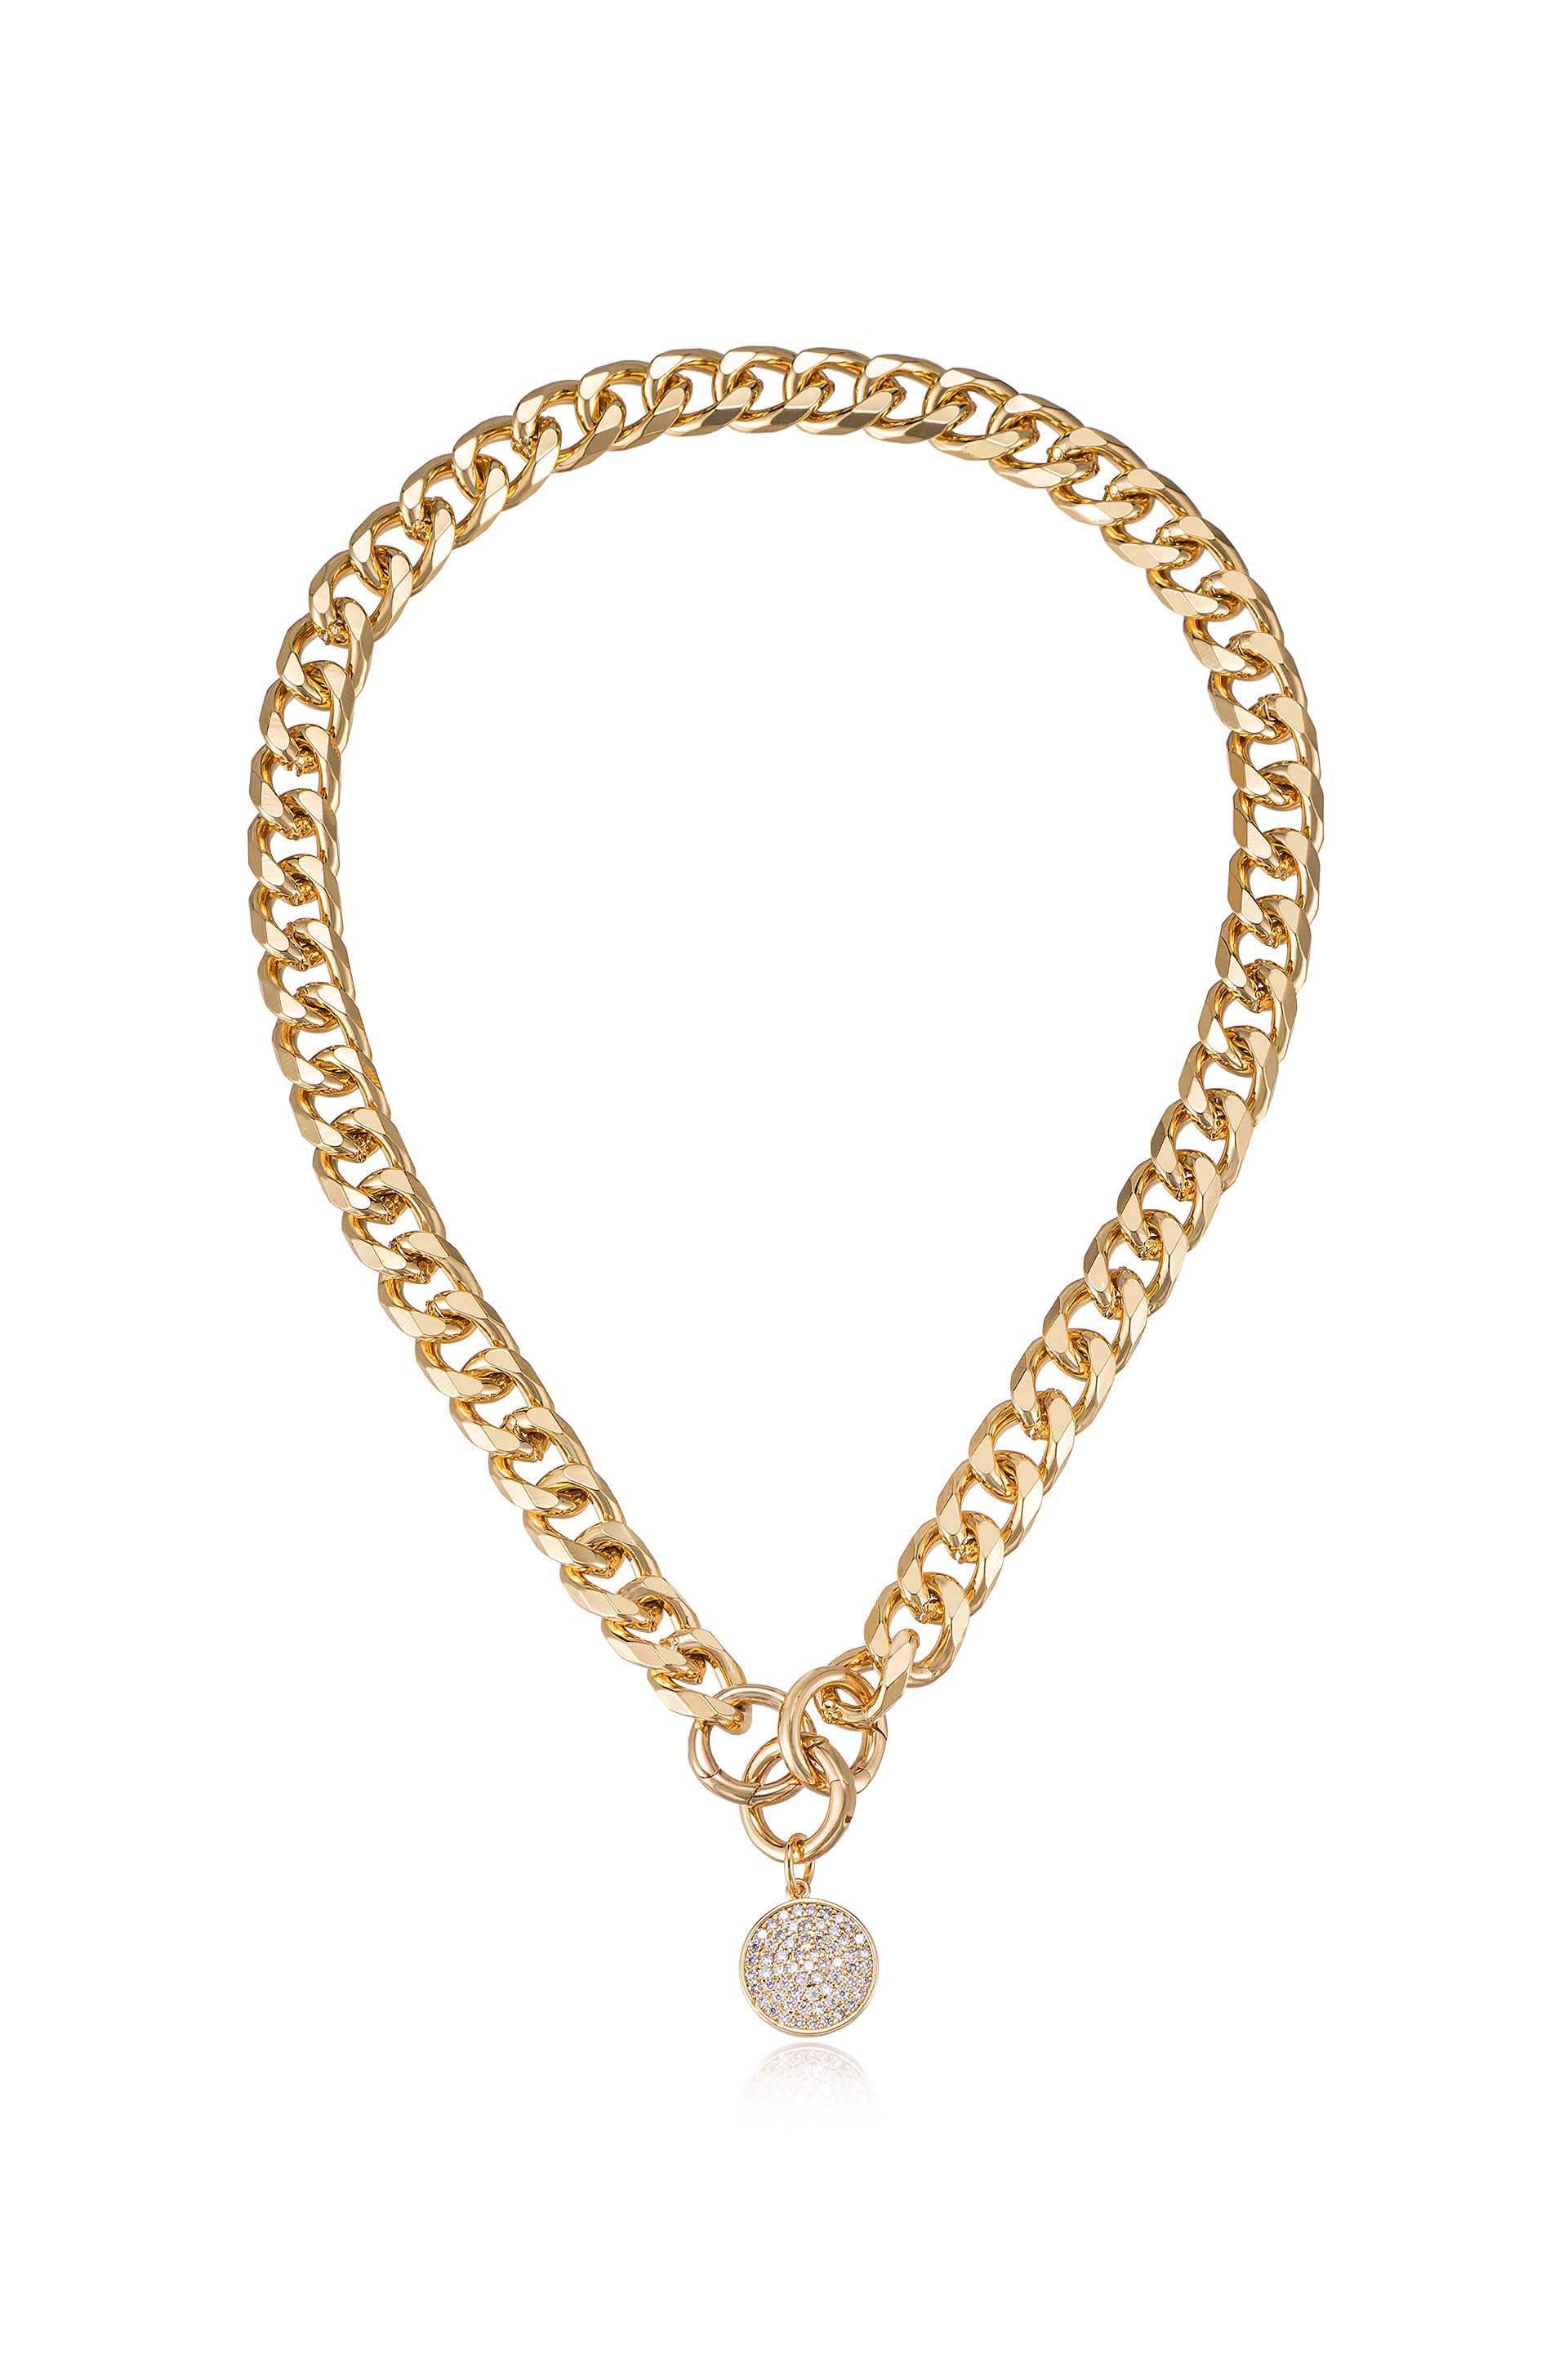 18ct Gold Choker Necklace For Women - Disc Necklace